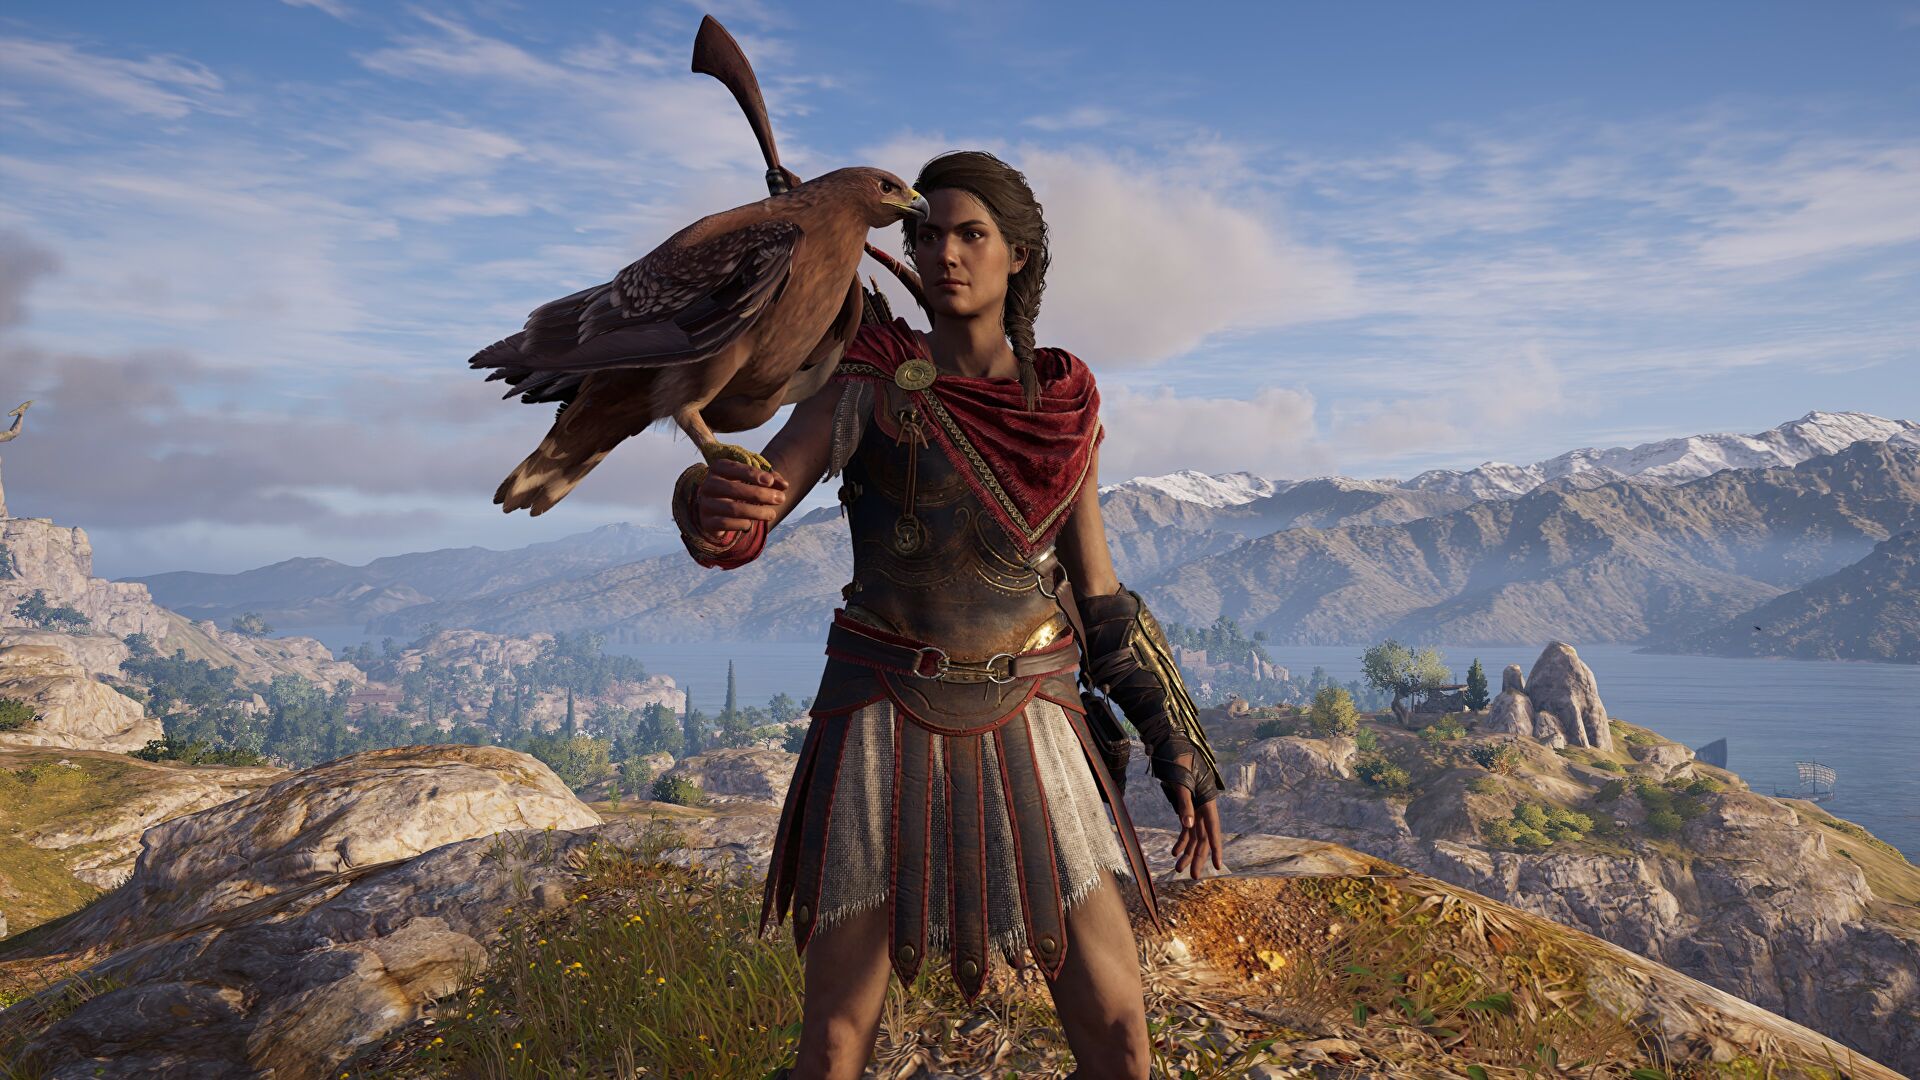 Assassin’s Creed Odyssey makes its hero’s journey onto Game Pass today